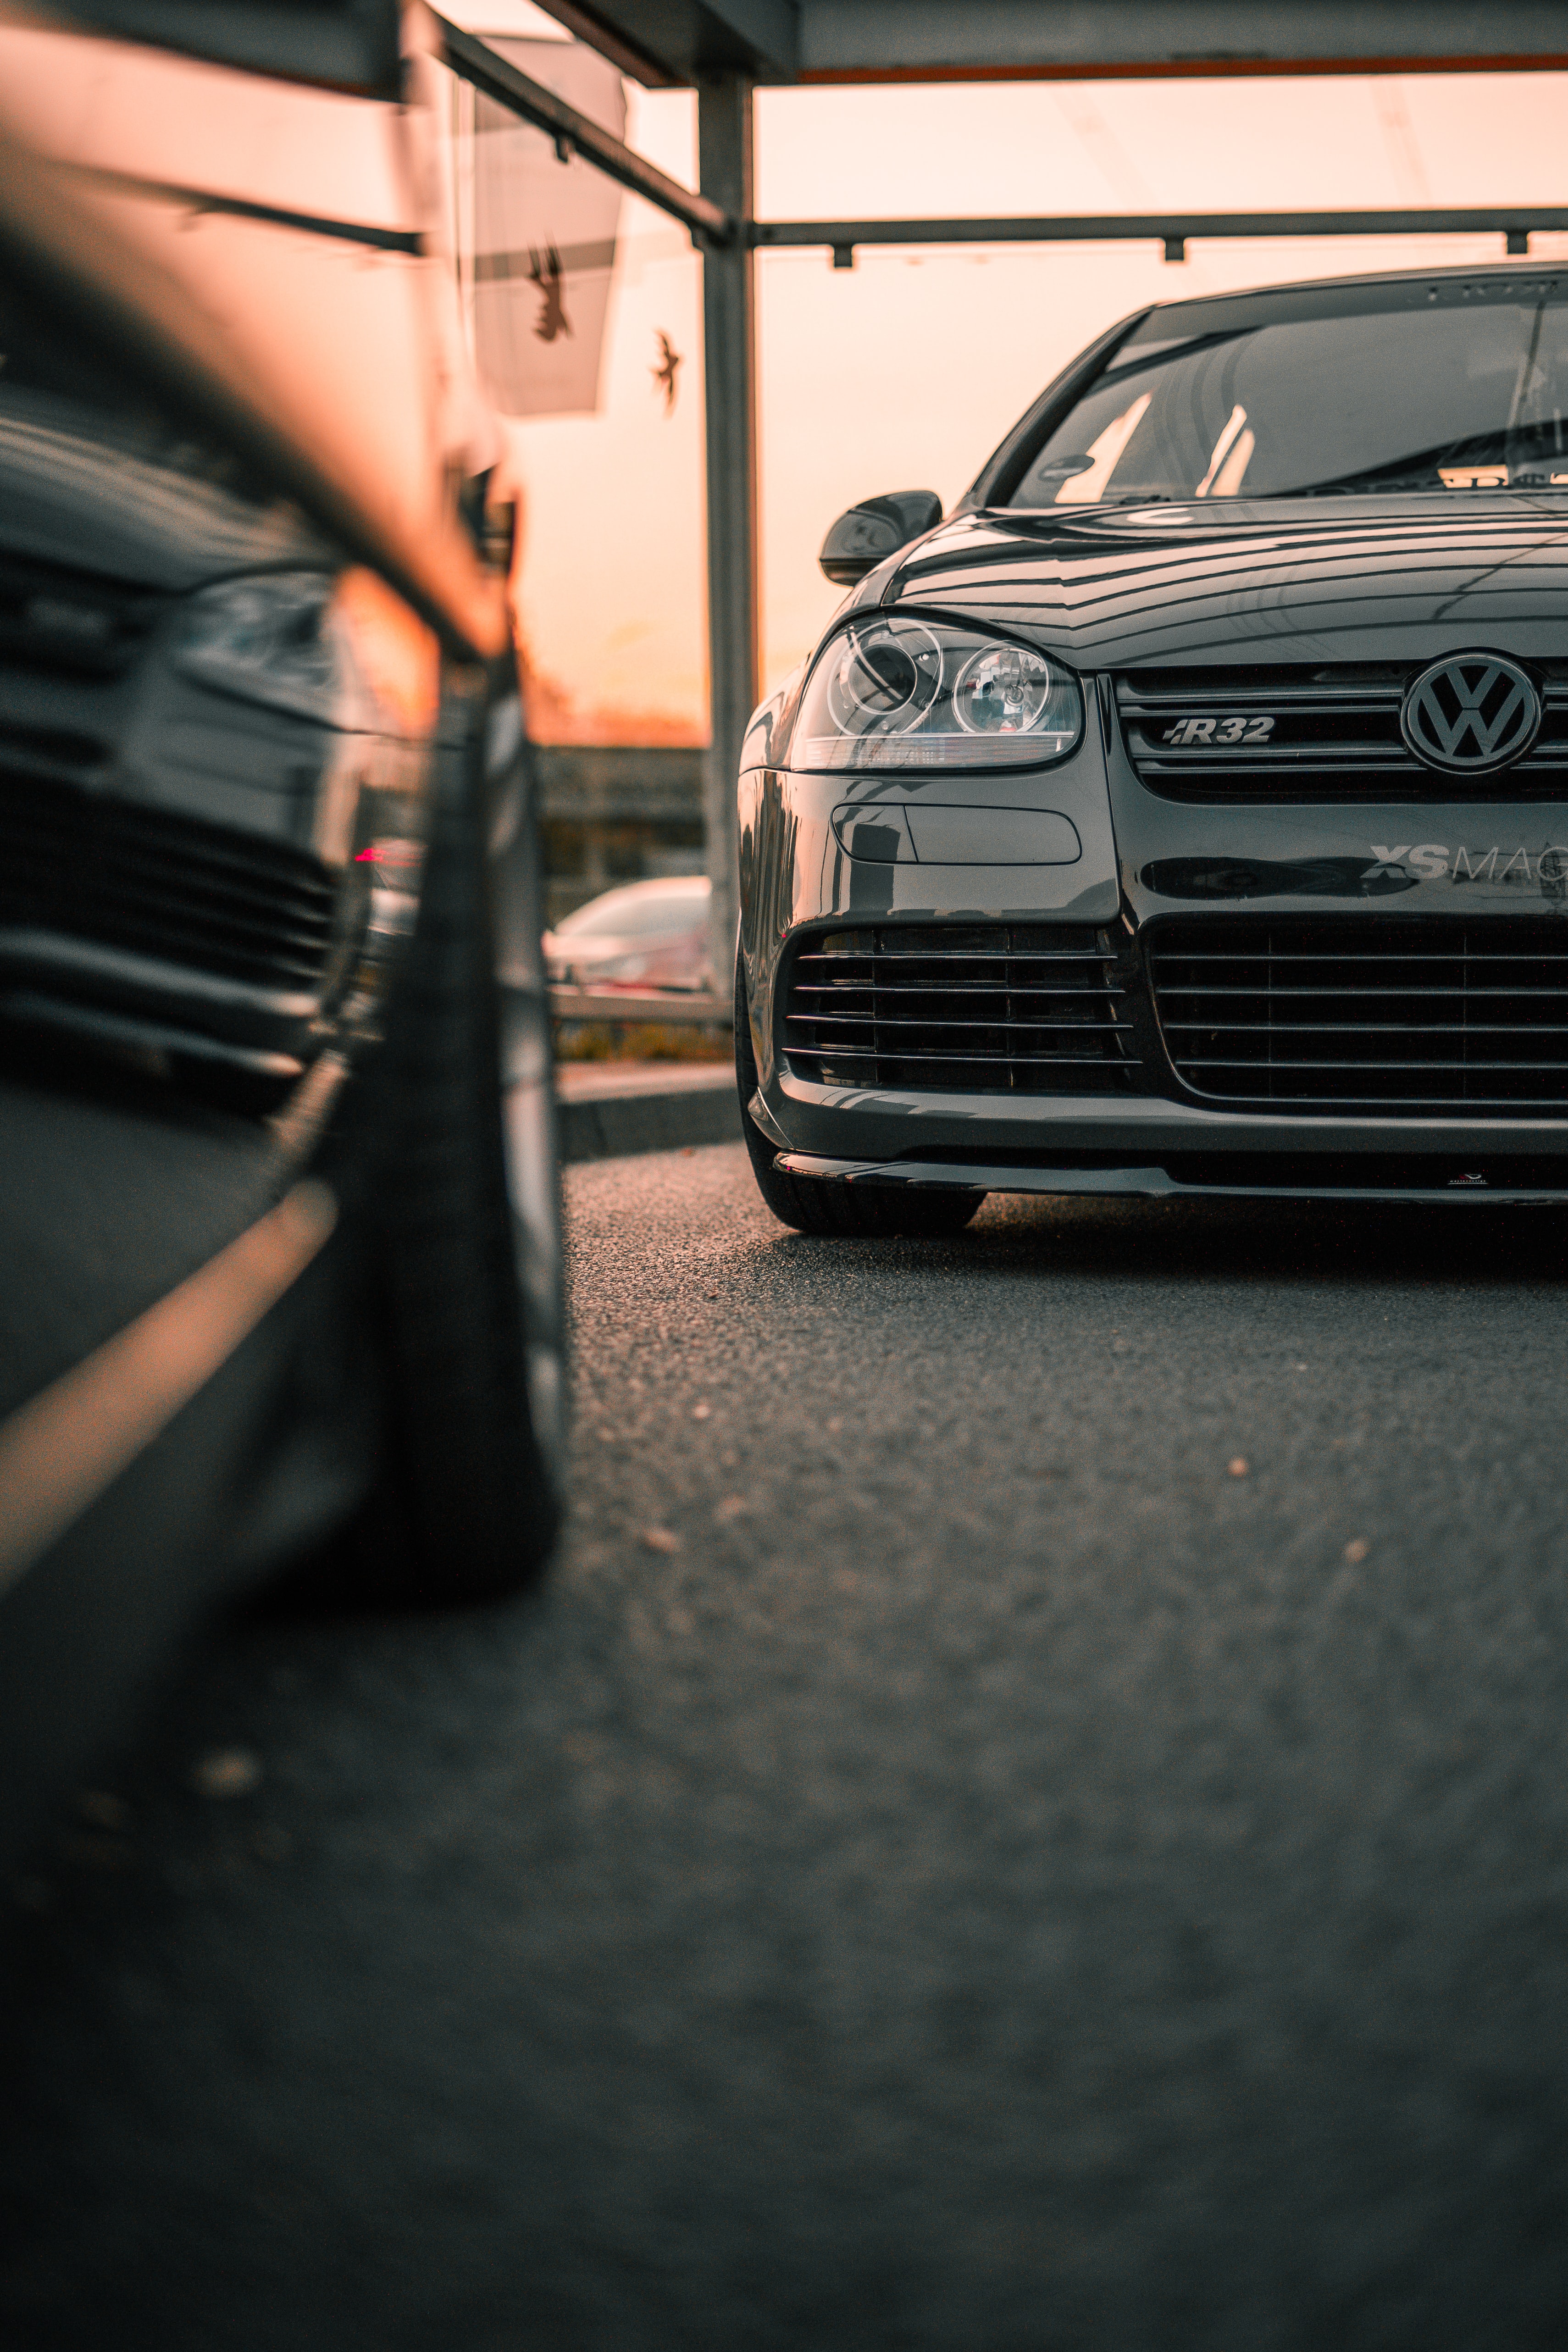 123750 download wallpaper volkswagen, cars, car, front view, volkswagen r32 screensavers and pictures for free